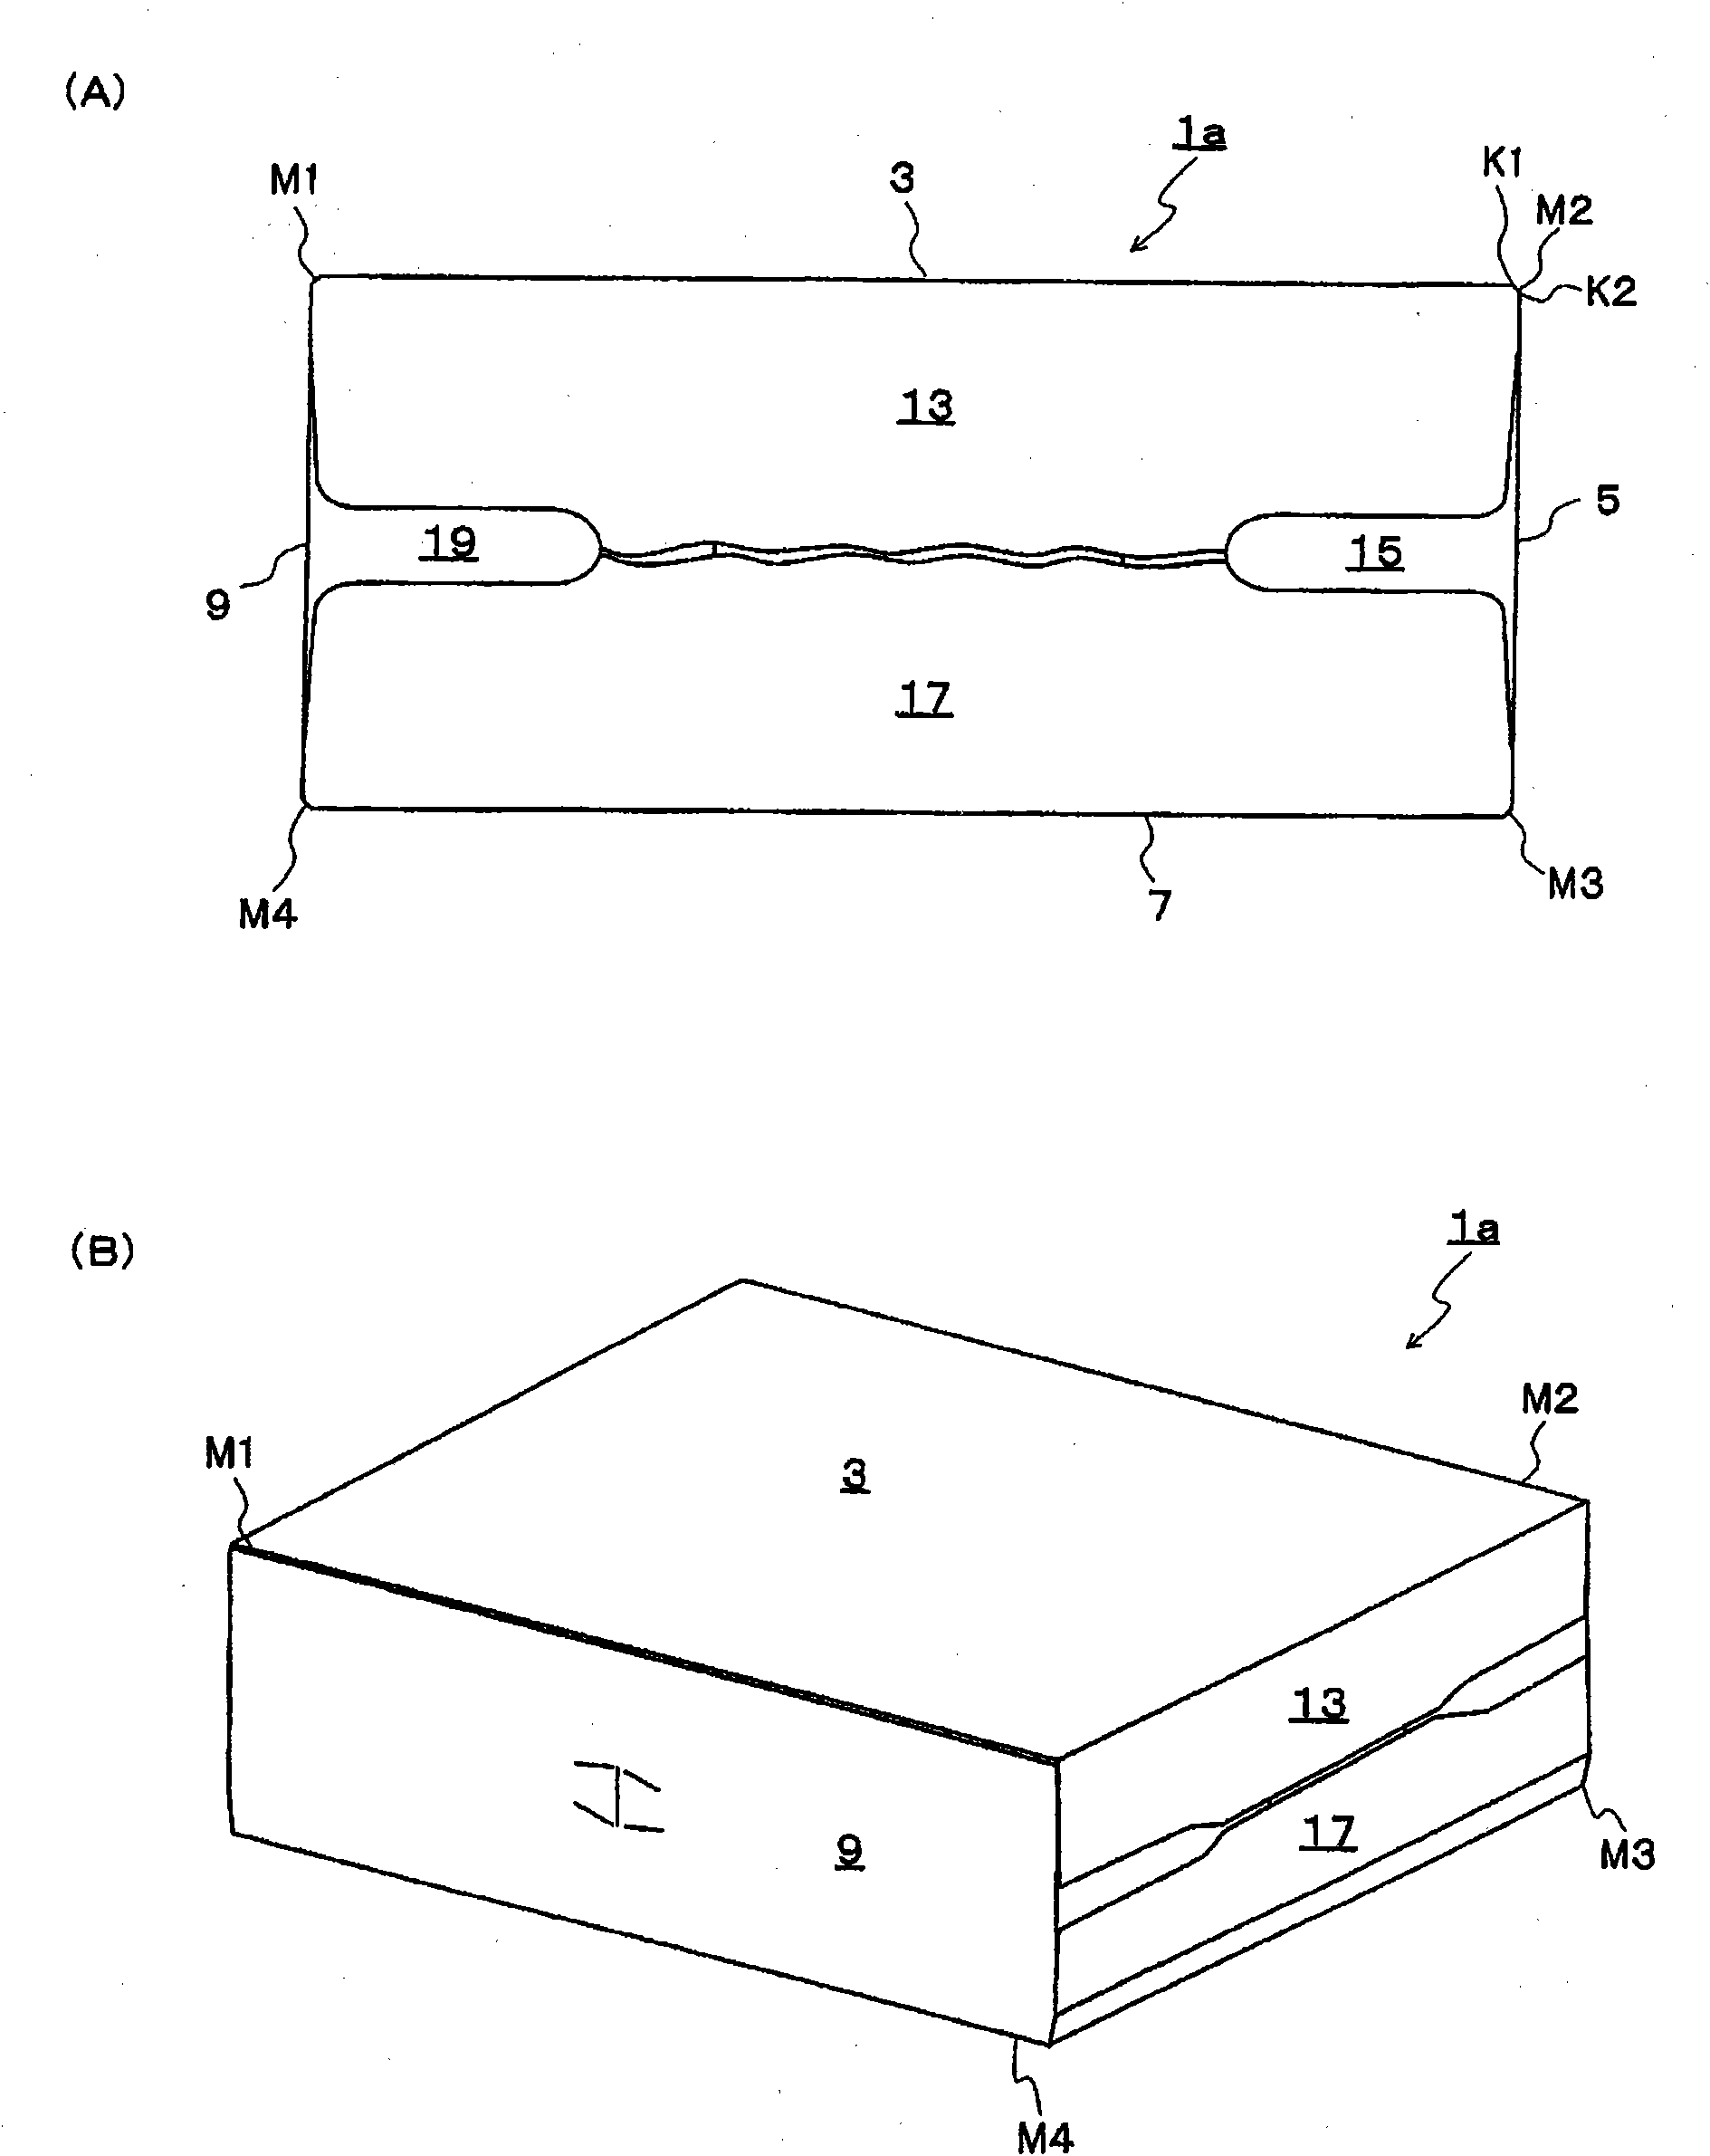 Shipping box, corrugated board blank sheet, and rule mark ring assembly